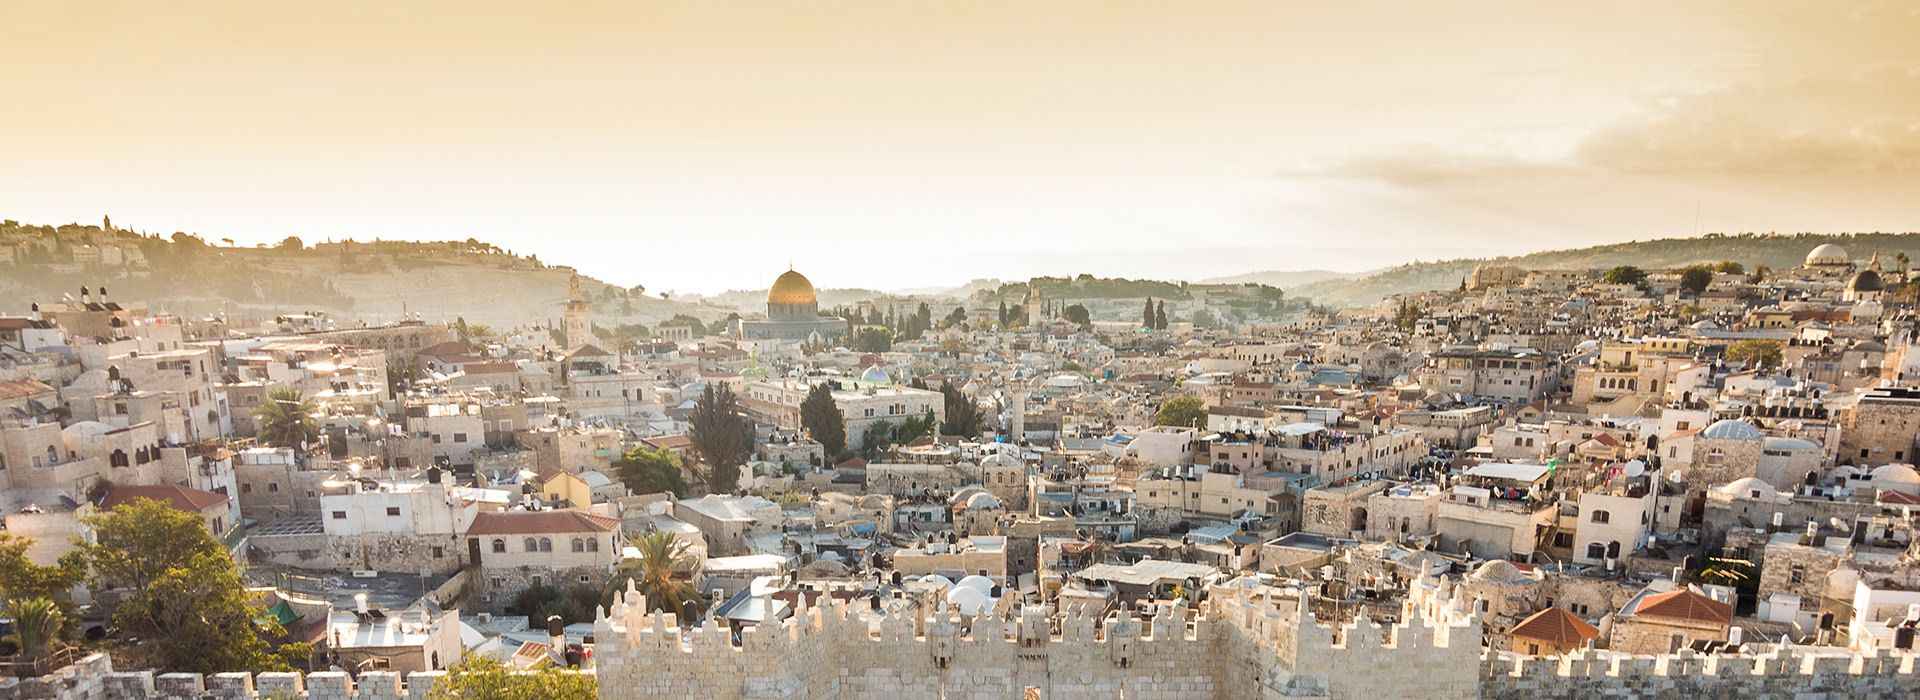 Israel Travel Guide - Travel Insights and Tips